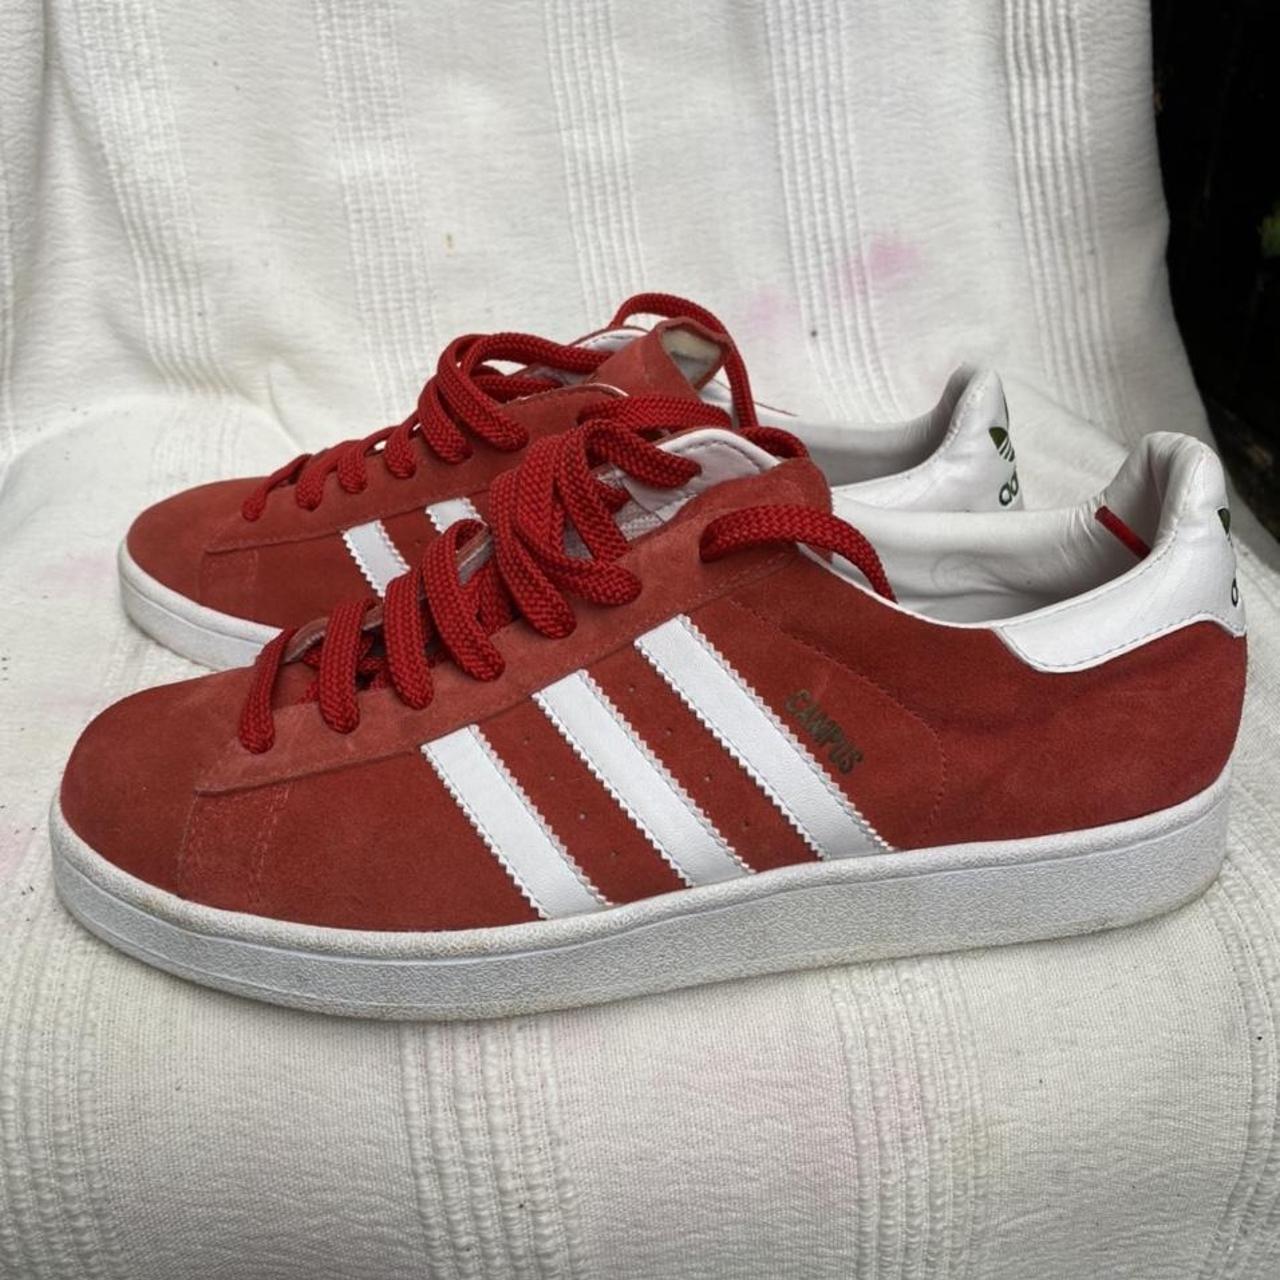 Adidas Campus Red size uk 9.5. I’ve had these in my... - Depop